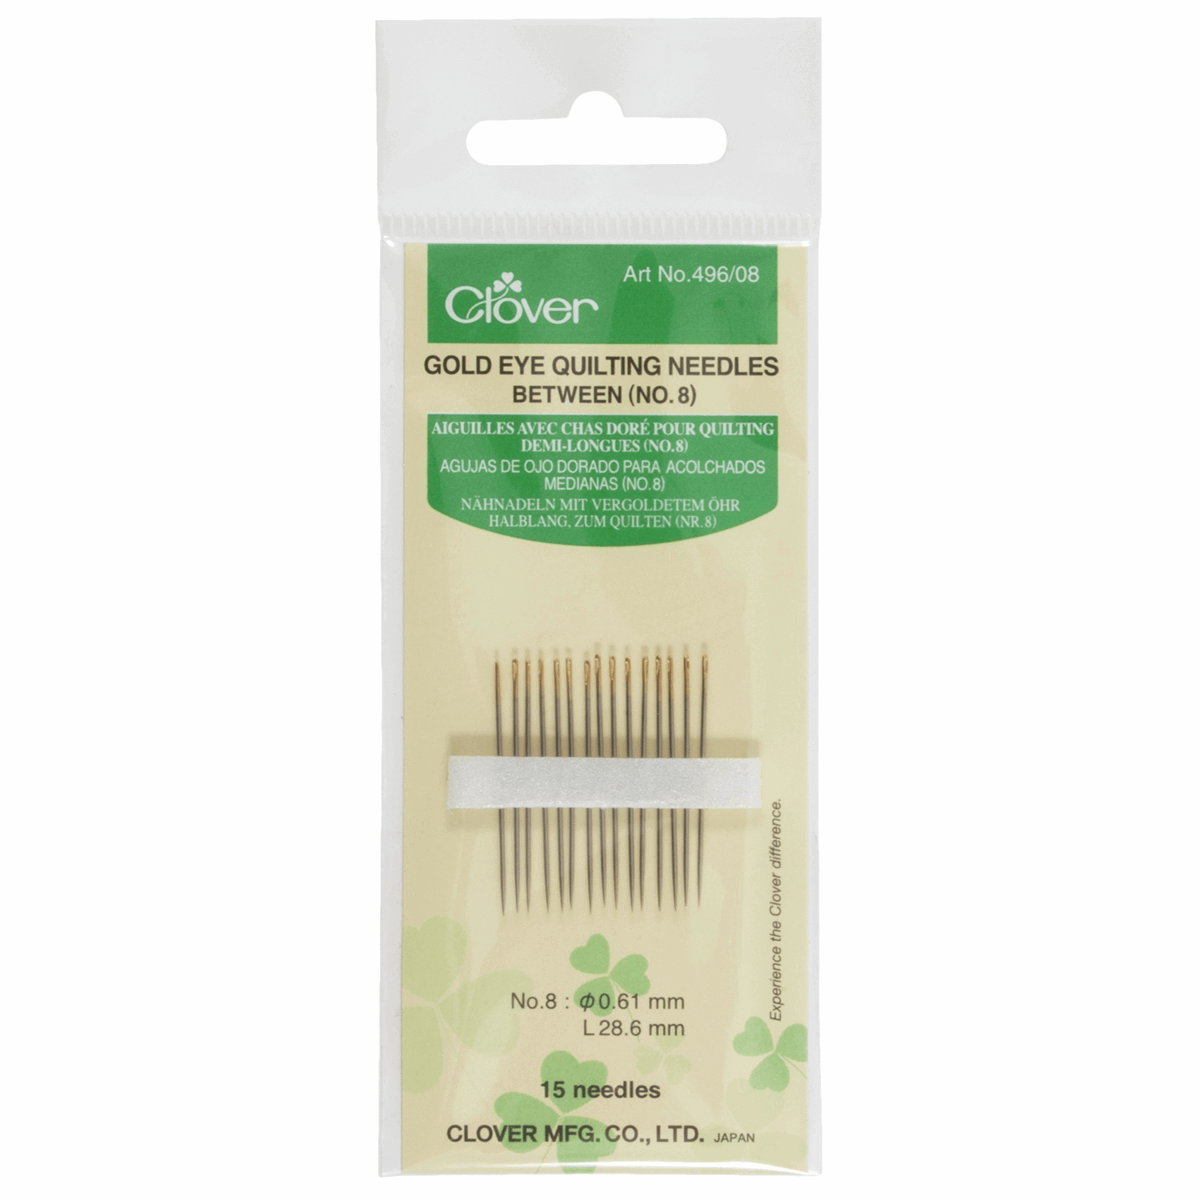 Clover Gold Eye Hand Quilting/Betweens Needles - Size No.8 (Pack of 15)